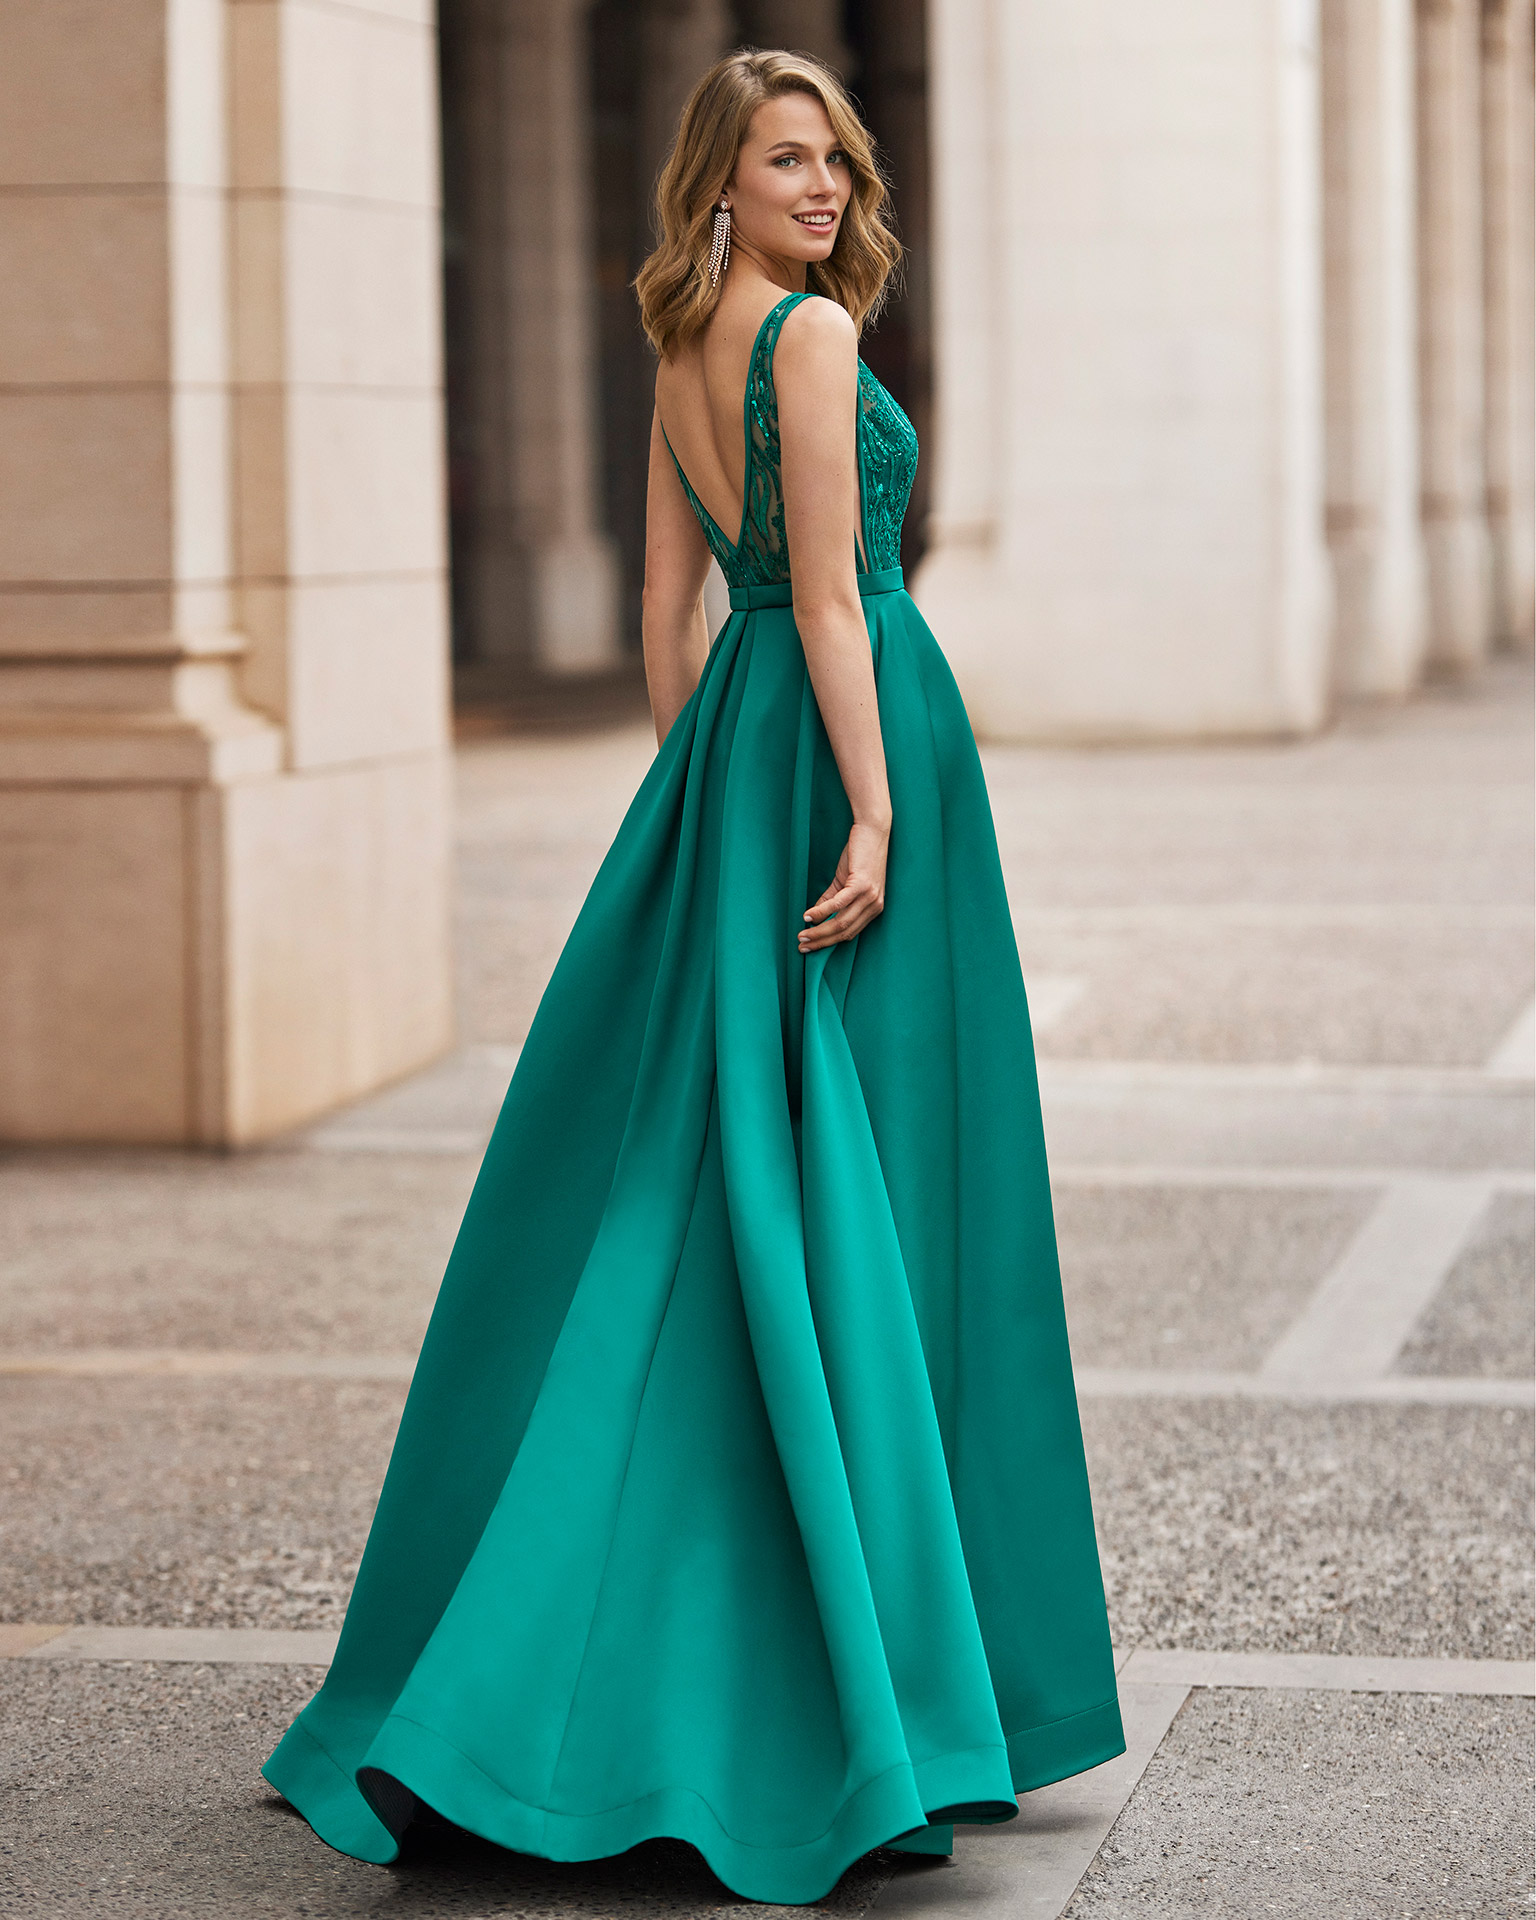 Classic long evening dress, made of satin. Marfil Barcelona design with a beaded lace bodice, a belt, and a pleated skirt. MARFIL_BARCELONA.